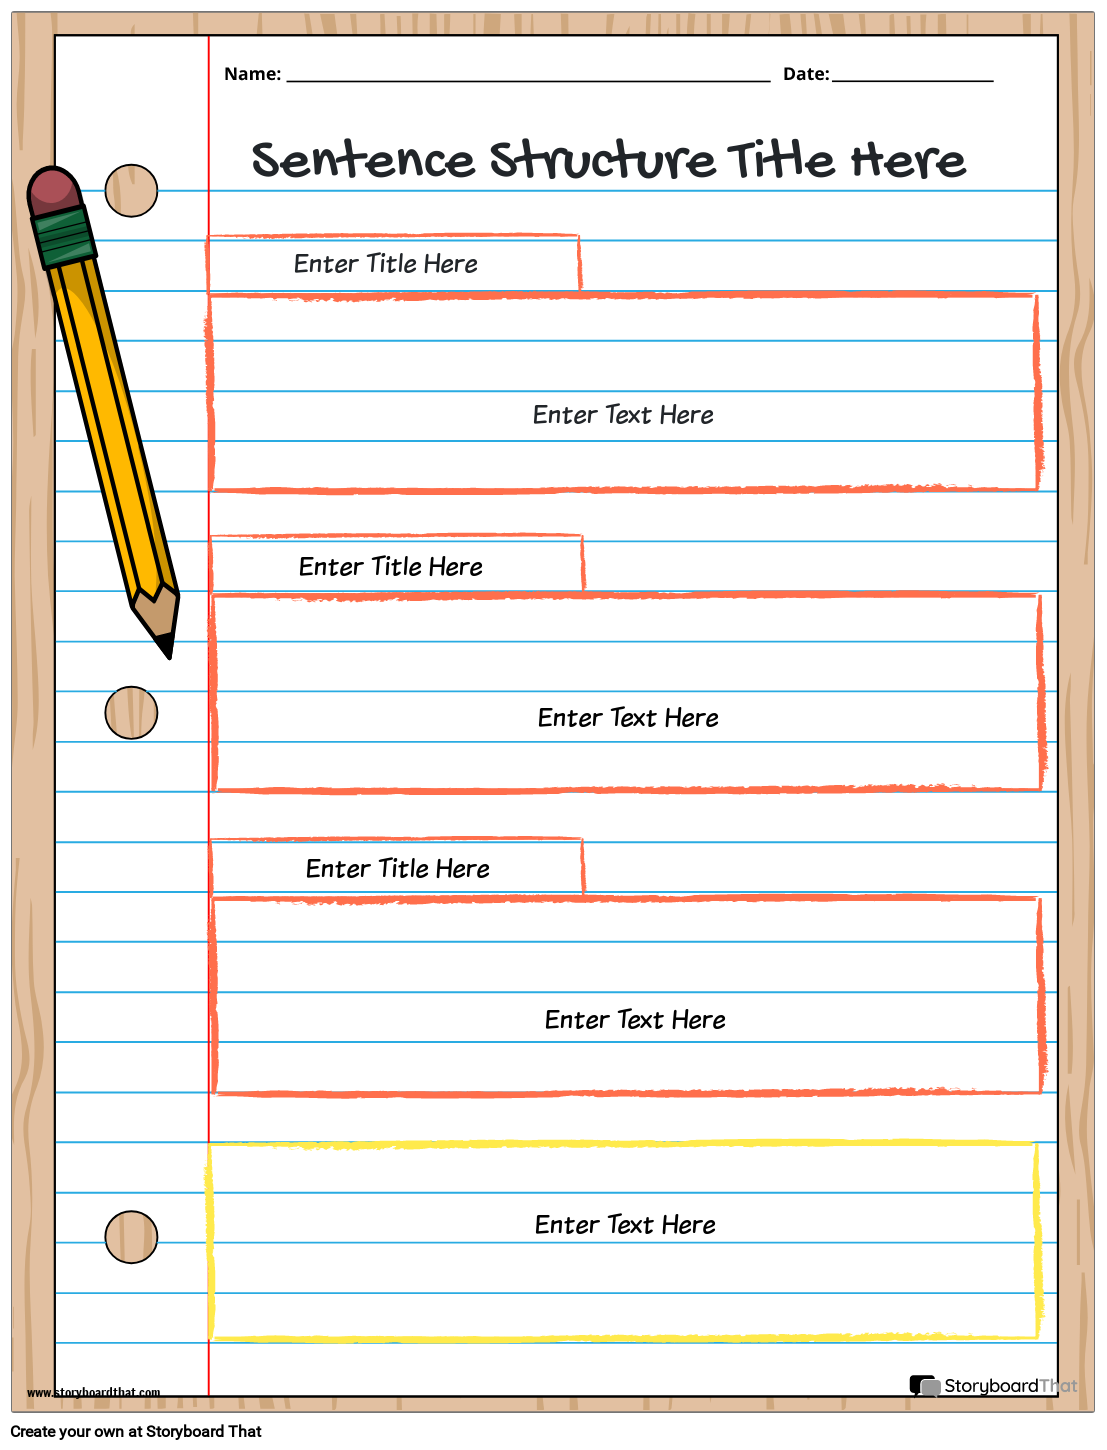 new-create-page-sentence-structure-template-2